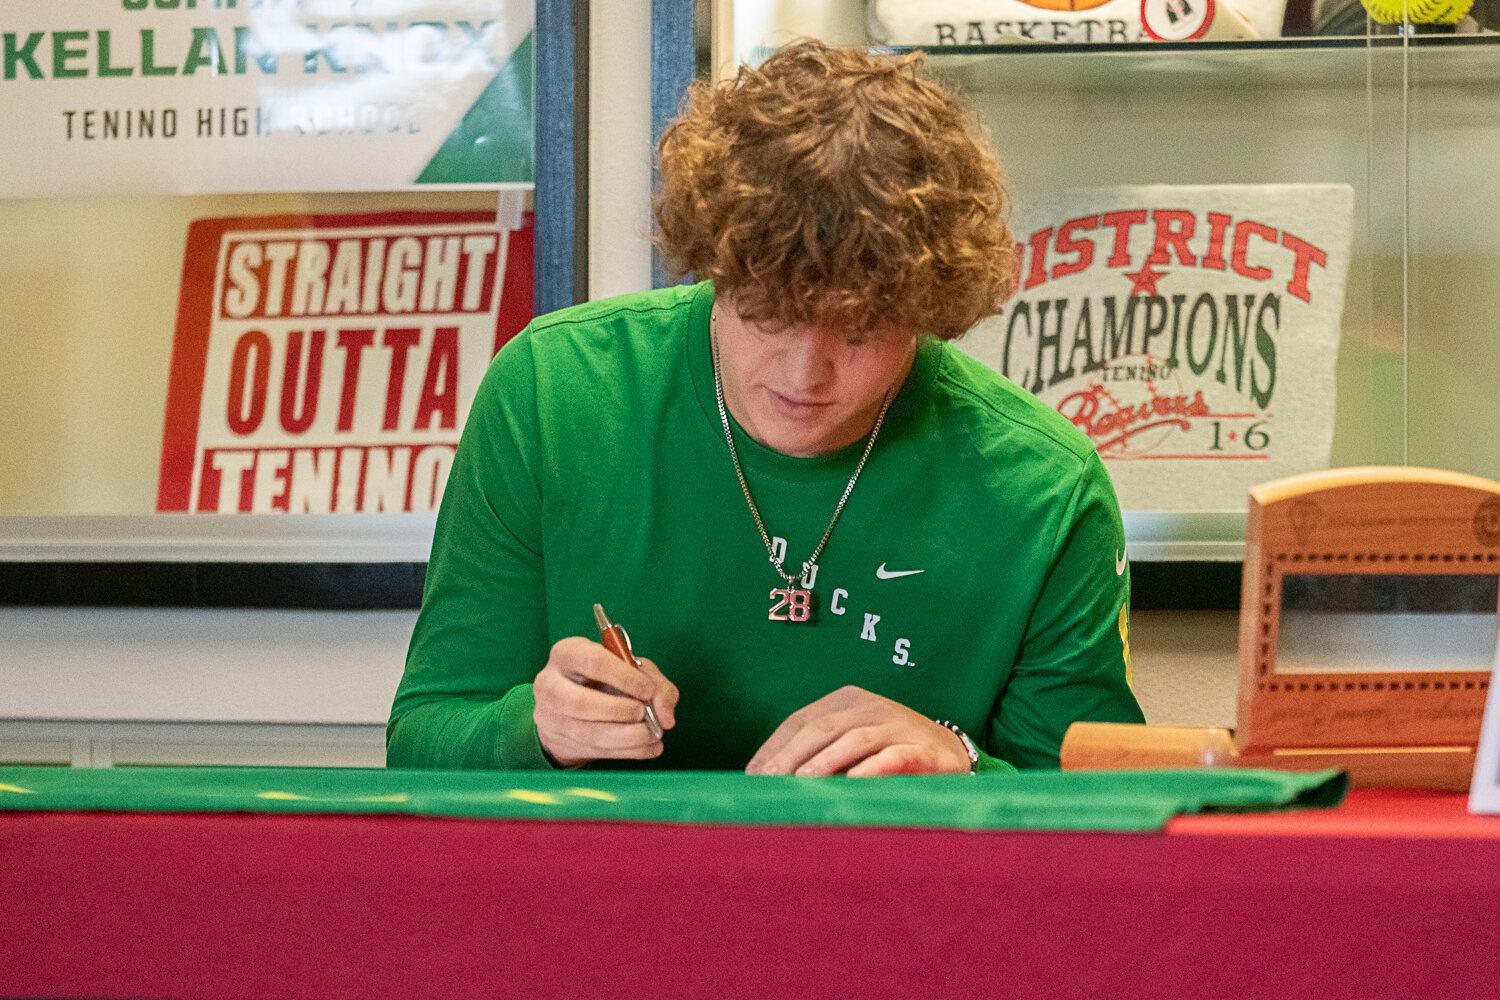 Kellan Knox signs his commitment to play for Oregon at a National Signing Day ceremony on Wednesday, Nov. 8 in Tenino.